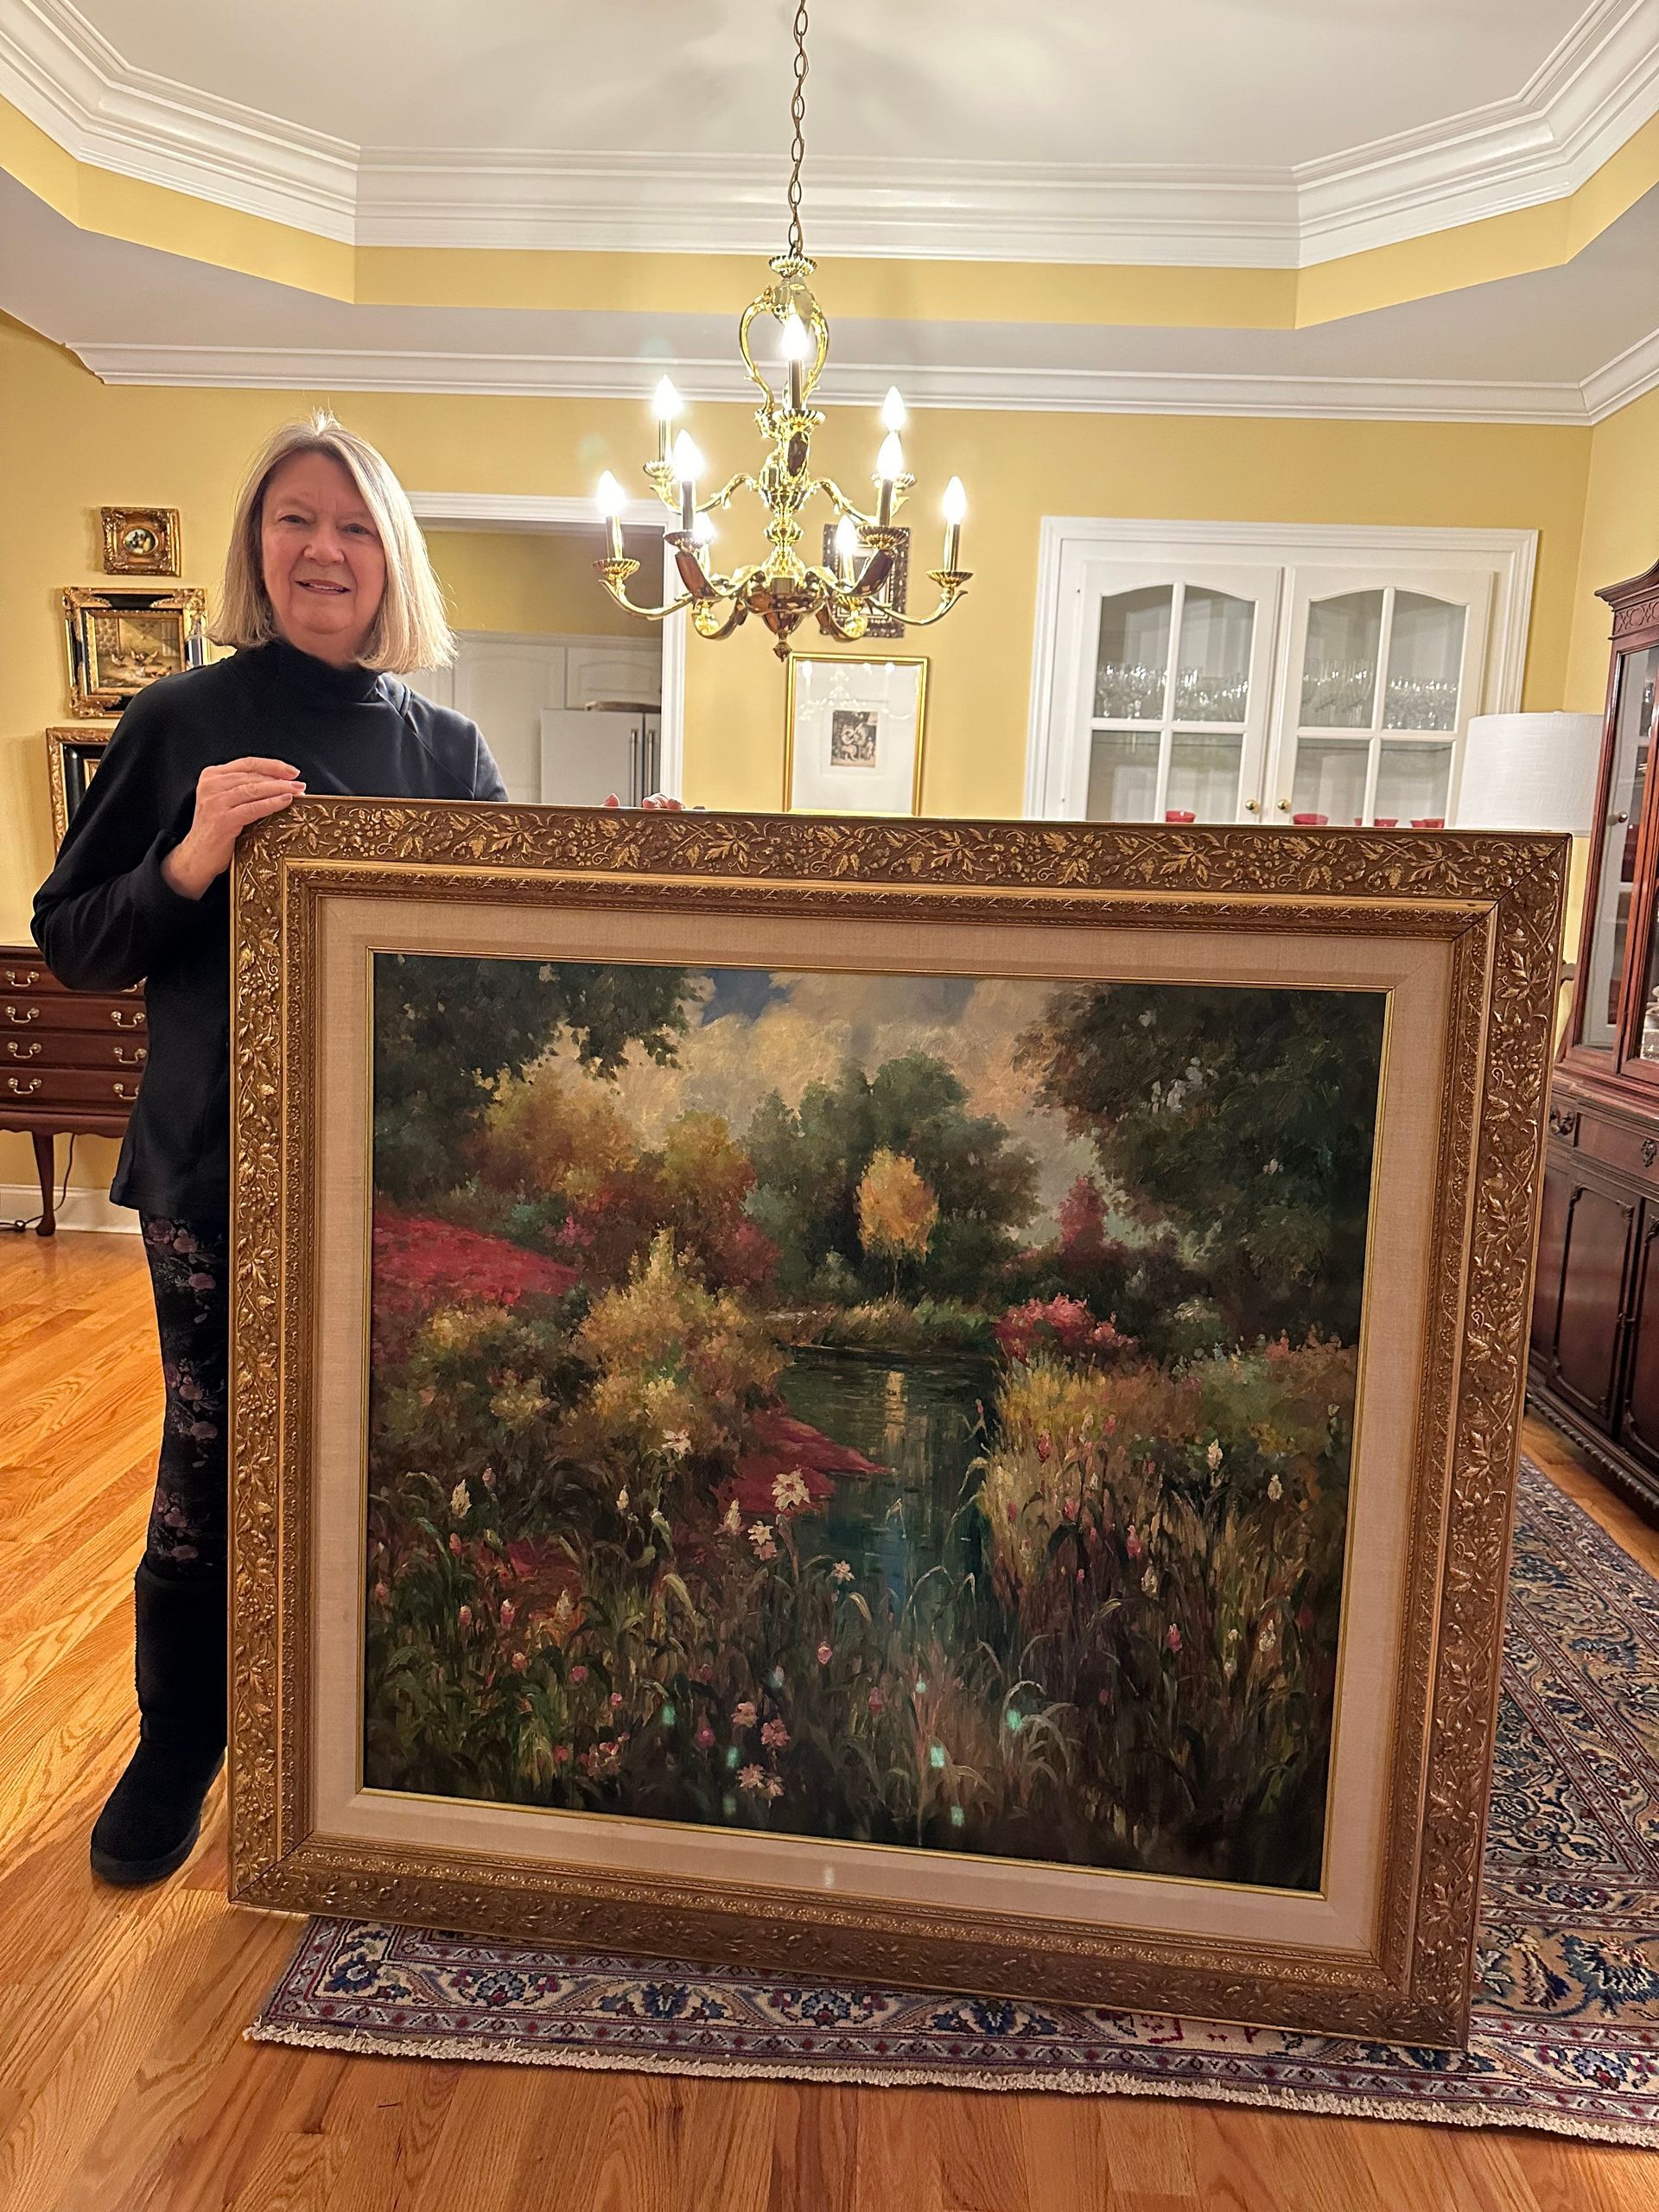 a woman is holding a large framed painting in a living room — Tampa, FL — Antique Restoration and Design